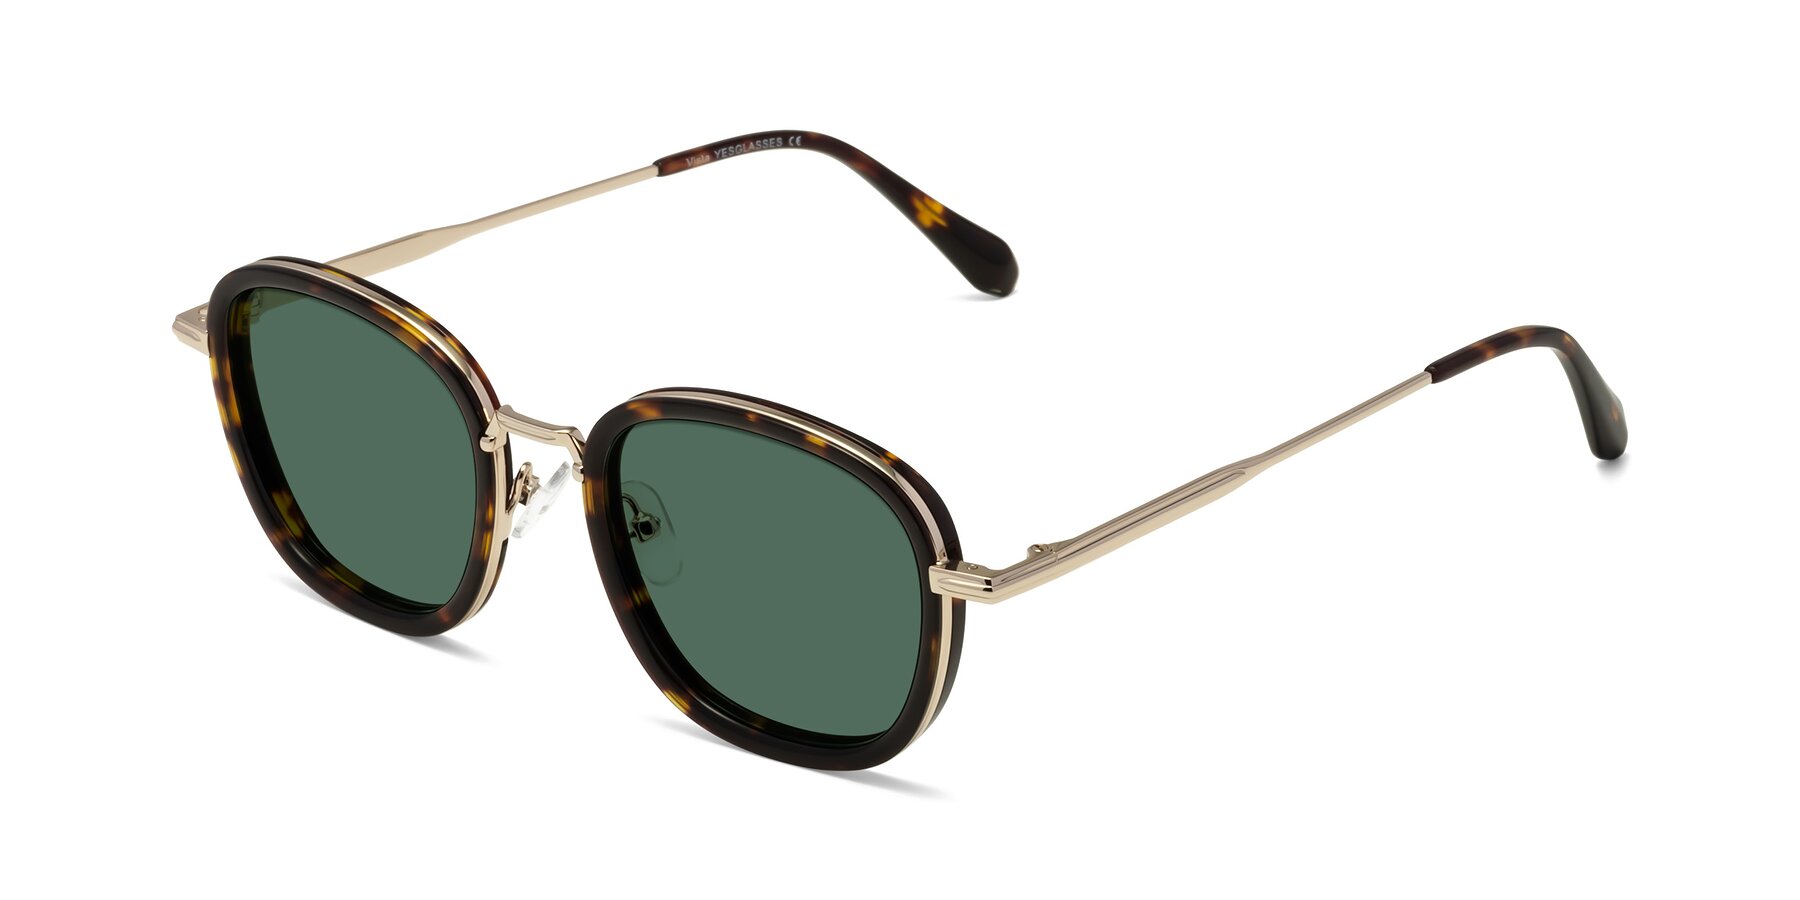 Angle of Vista in Tortoise-Light Gold with Green Polarized Lenses